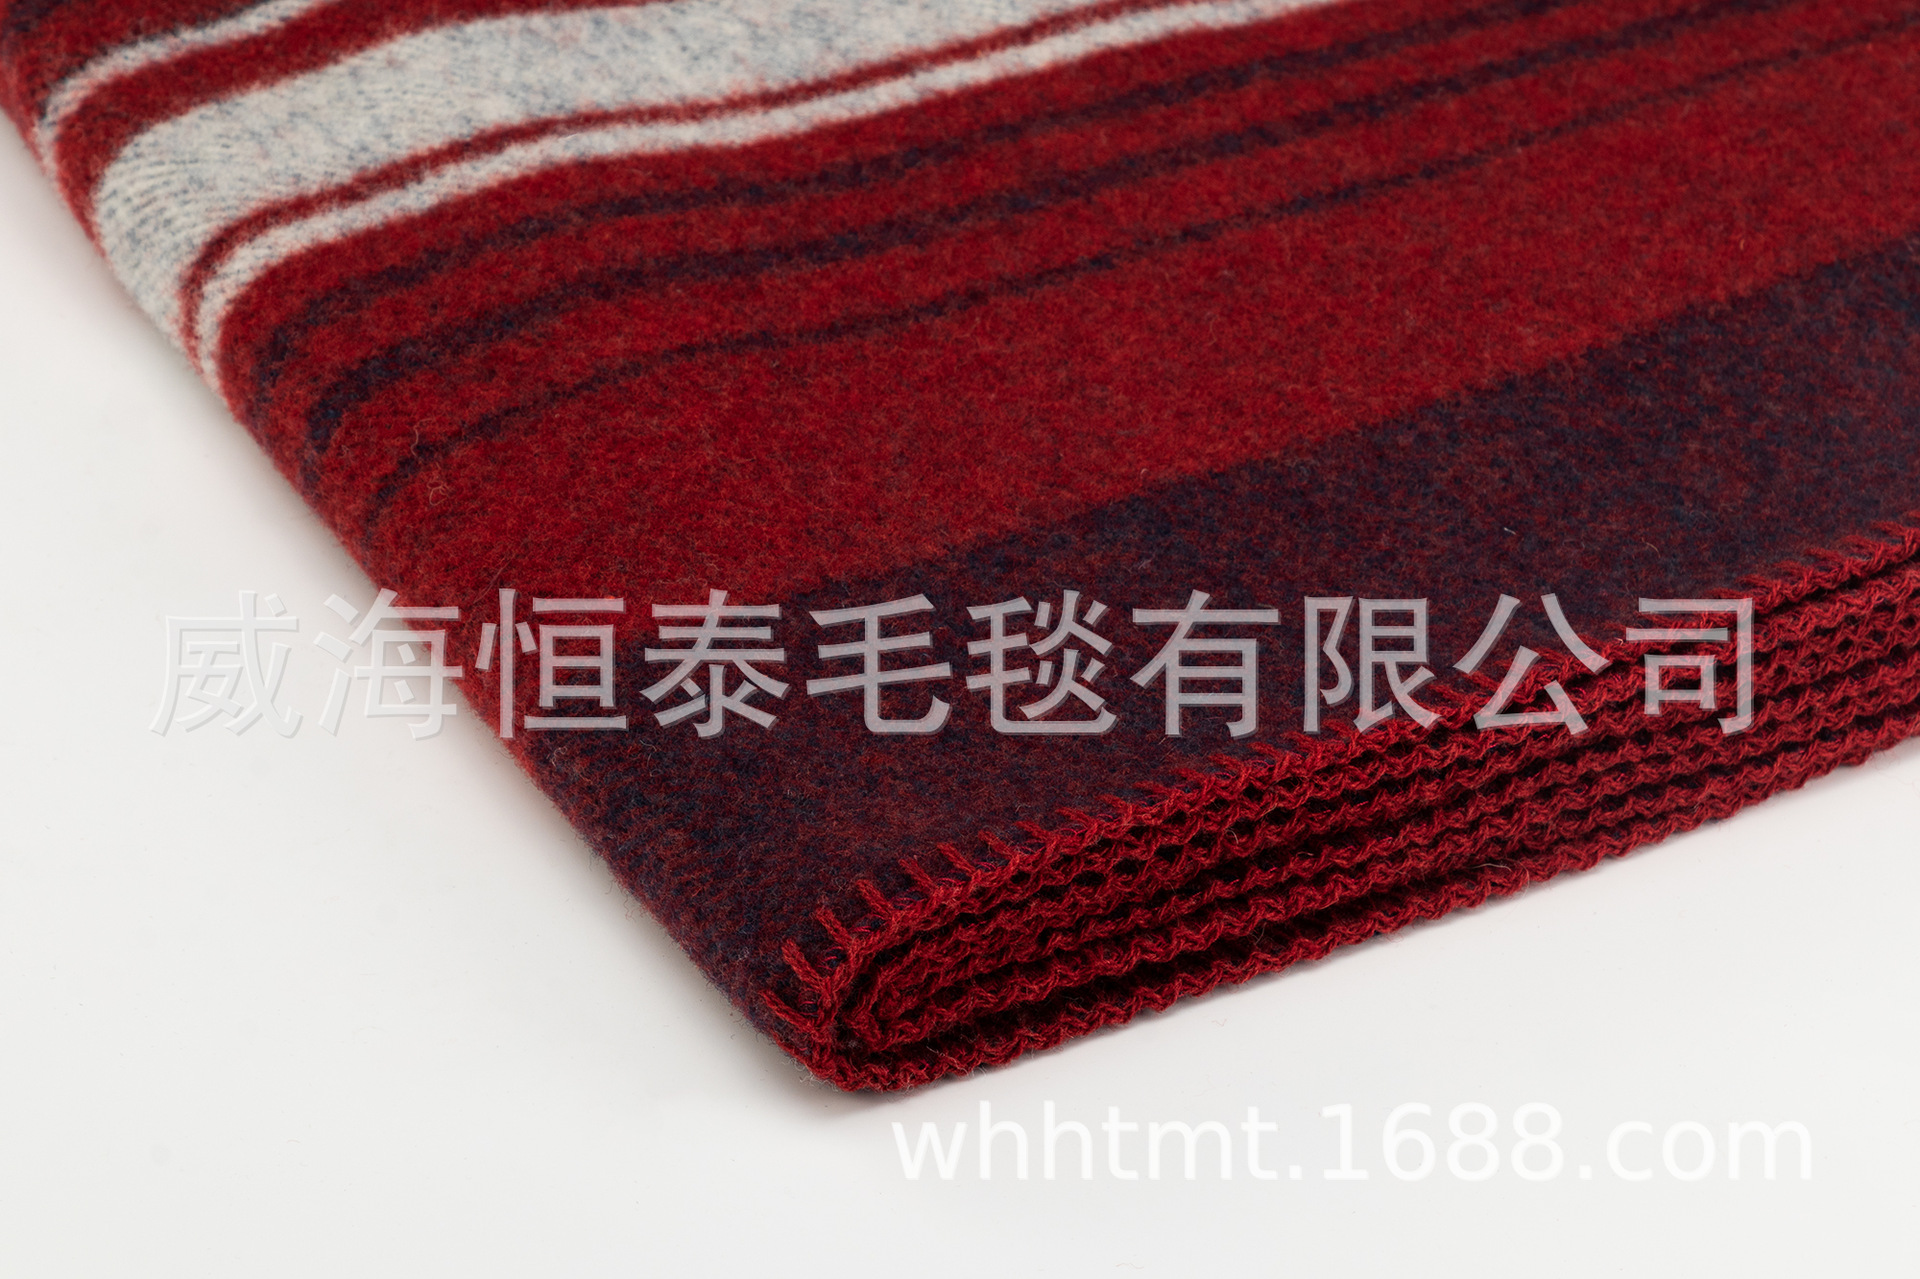 [Factory-Operated Processing] Wool Acrylic American Pastoral Blended Blanket